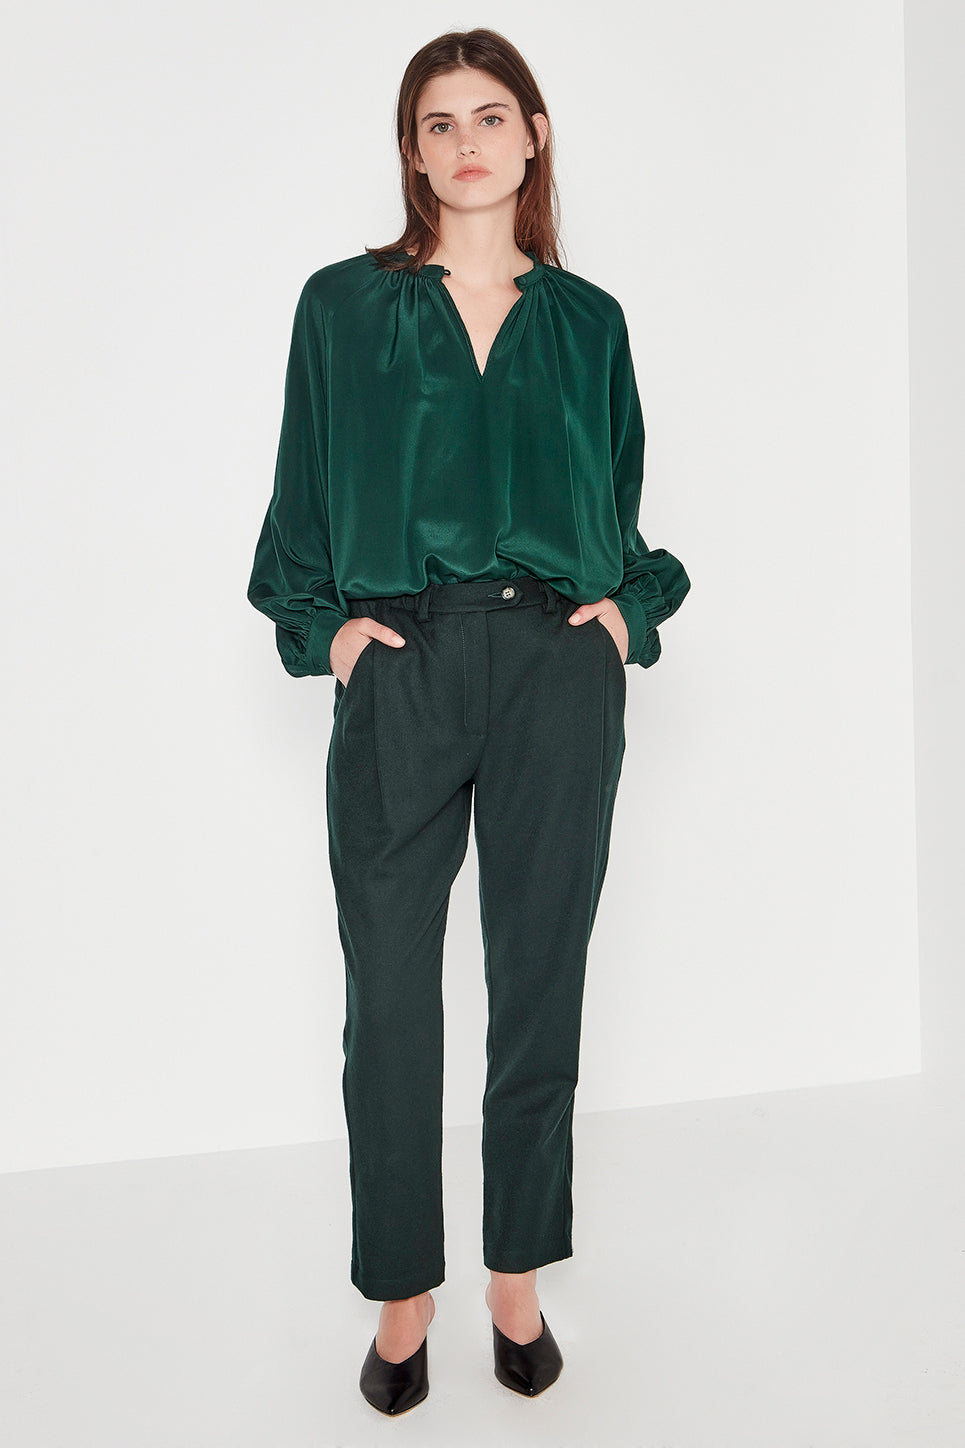 The Musket Trouser in Emerald